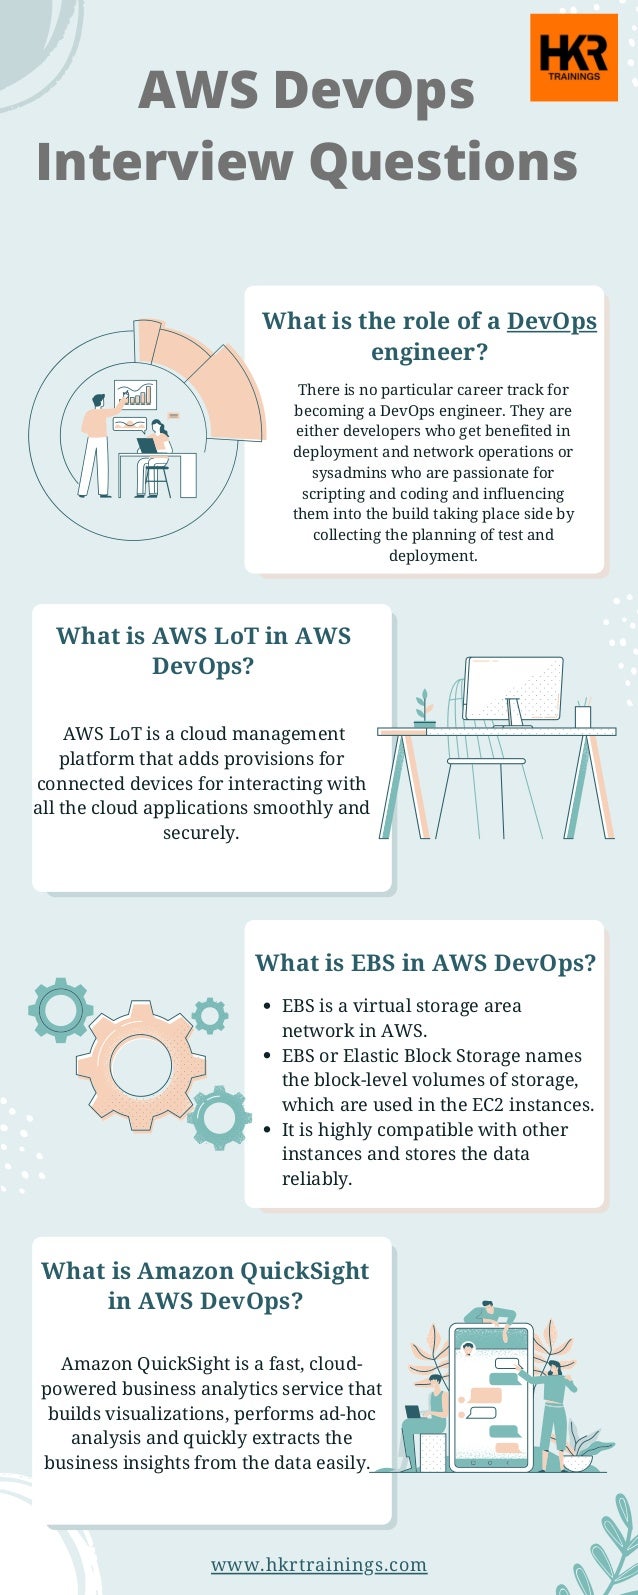 What is the role of a DevOps

engineer?


What is EBS in AWS DevOps?


EBS is a virtual storage area

network in AWS.
EBS or Elastic Block Storage names
the block-level volumes of storage,

which are used in the EC2 instances.
It is highly compatible with other

instances and stores the data

reliably.
What is Amazon QuickSight

in AWS DevOps?


Amazon QuickSight is a fast, cloud-

powered business analytics service that

builds visualizations, performs ad-hoc

analysis and quickly extracts the

business insights from the data easily.
There is no particular career track for

becoming a DevOps engineer. They are

either developers who get benefited in

deployment and network operations or

sysadmins who are passionate for

scripting and coding and influencing

them into the build taking place side by

collecting the planning of test and

deployment.
What is AWS LoT in AWS

DevOps?


AWS LoT is a cloud management

platform that adds provisions for

connected devices for interacting with

all the cloud applications smoothly and

securely.
www.hkrtrainings.com
AWS DevOps

Interview Questions


 